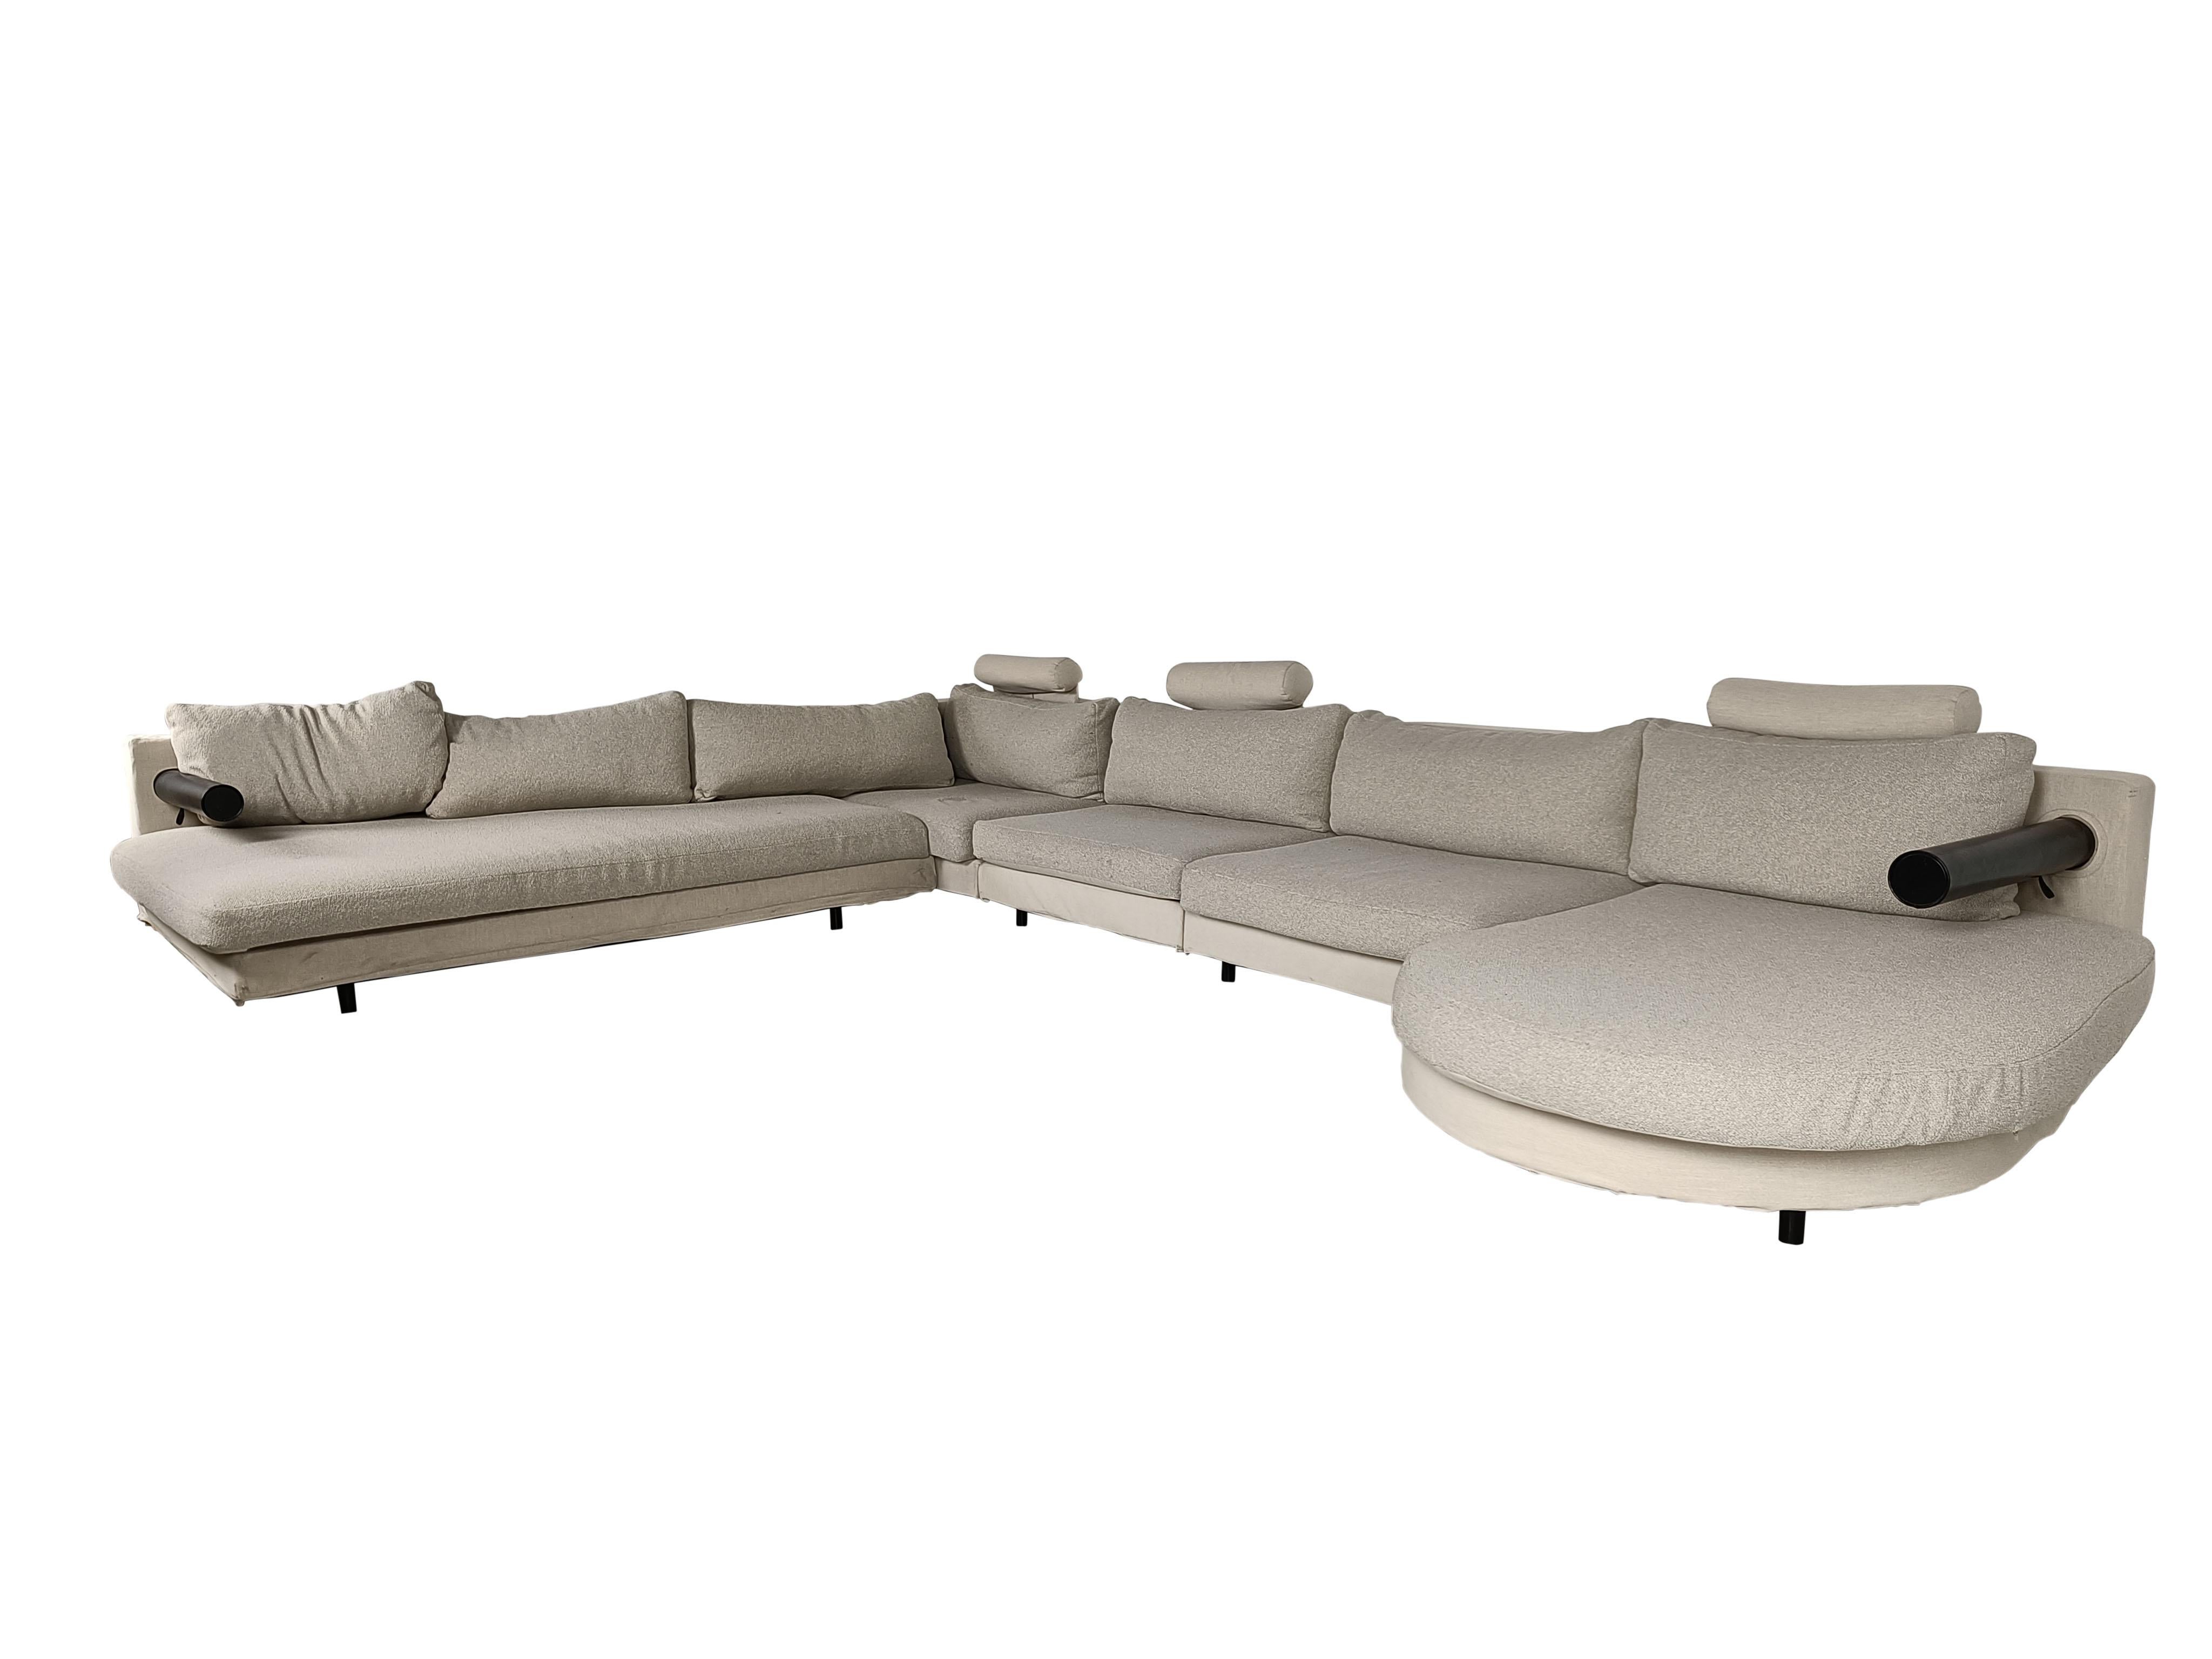 Large 'Sity' sofa set designed by Antonio Citterio for B&B italia.

This sofa is upholstered in grey fabric and has black leather armrests.

This post modern sofa offers a large seating area and great comfort thanks to the daybed